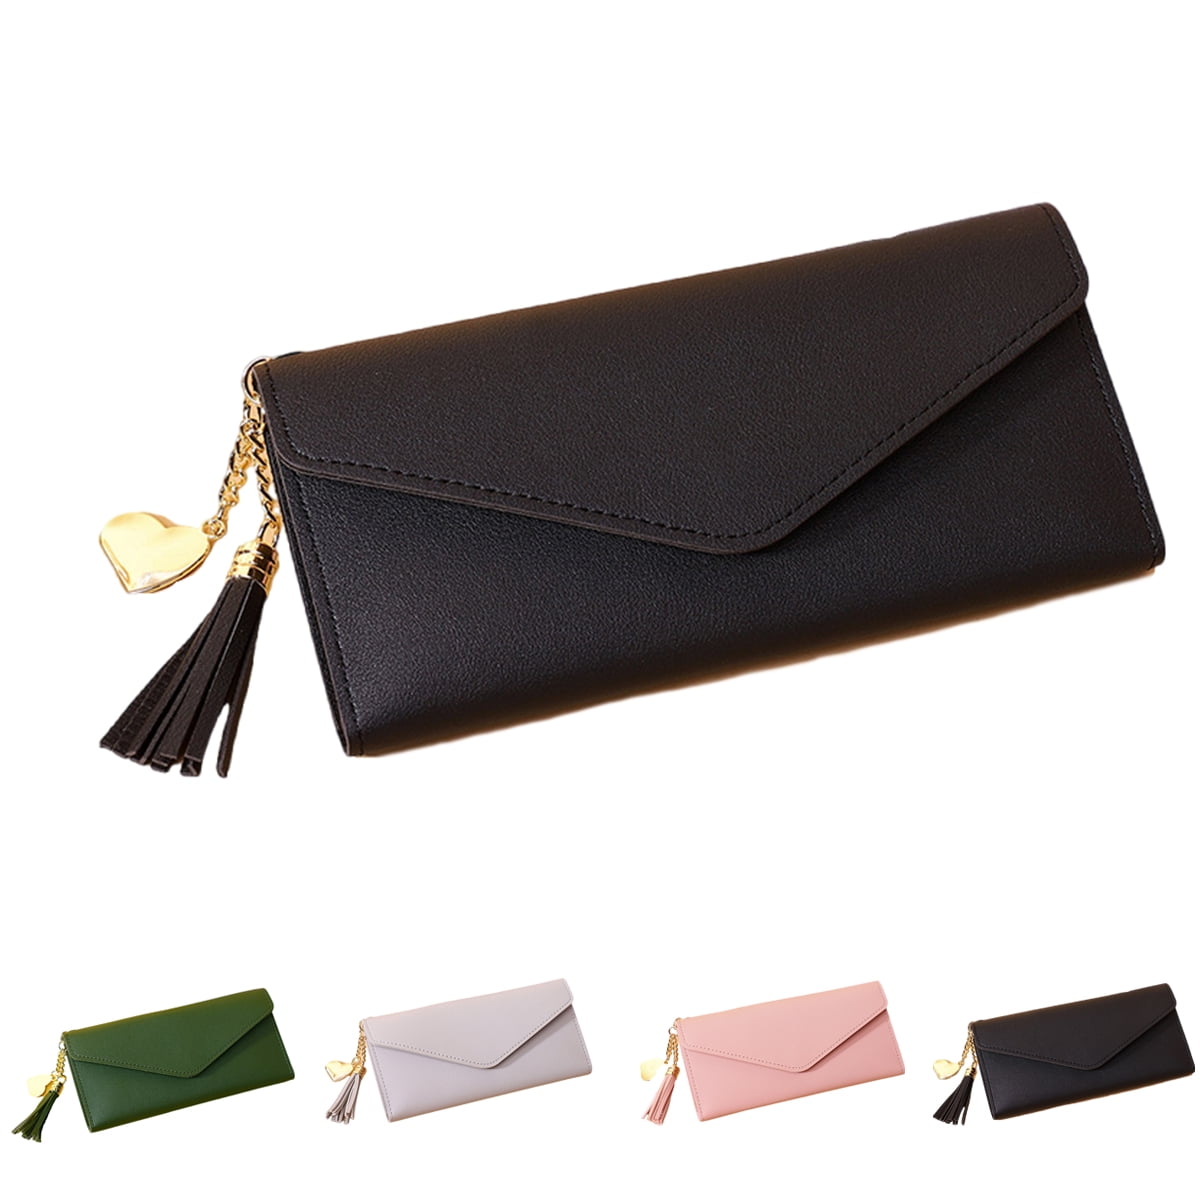 Joy Clean & Chic Saffiano Leather Clutch Wallet with RFID Tech - 20787867 |  HSN